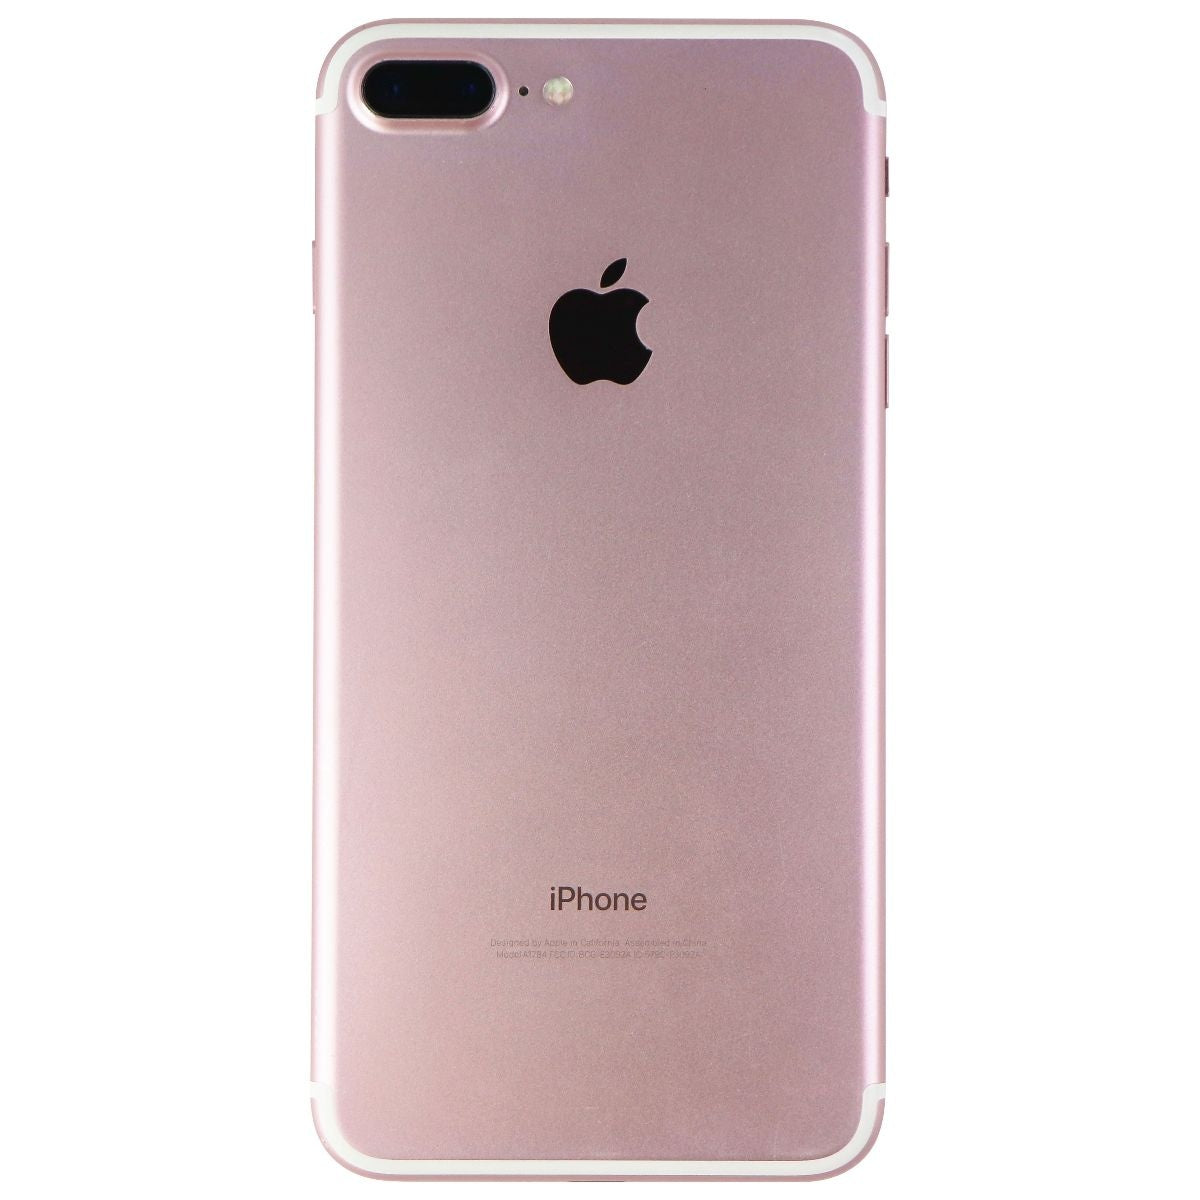 Apple iPhone 7 Plus (5.5-in) Smartphone (A1784) GSM + CDMA - 32GB / Rose Gold Cell Phones & Smartphones Apple    - Simple Cell Bulk Wholesale Pricing - USA Seller